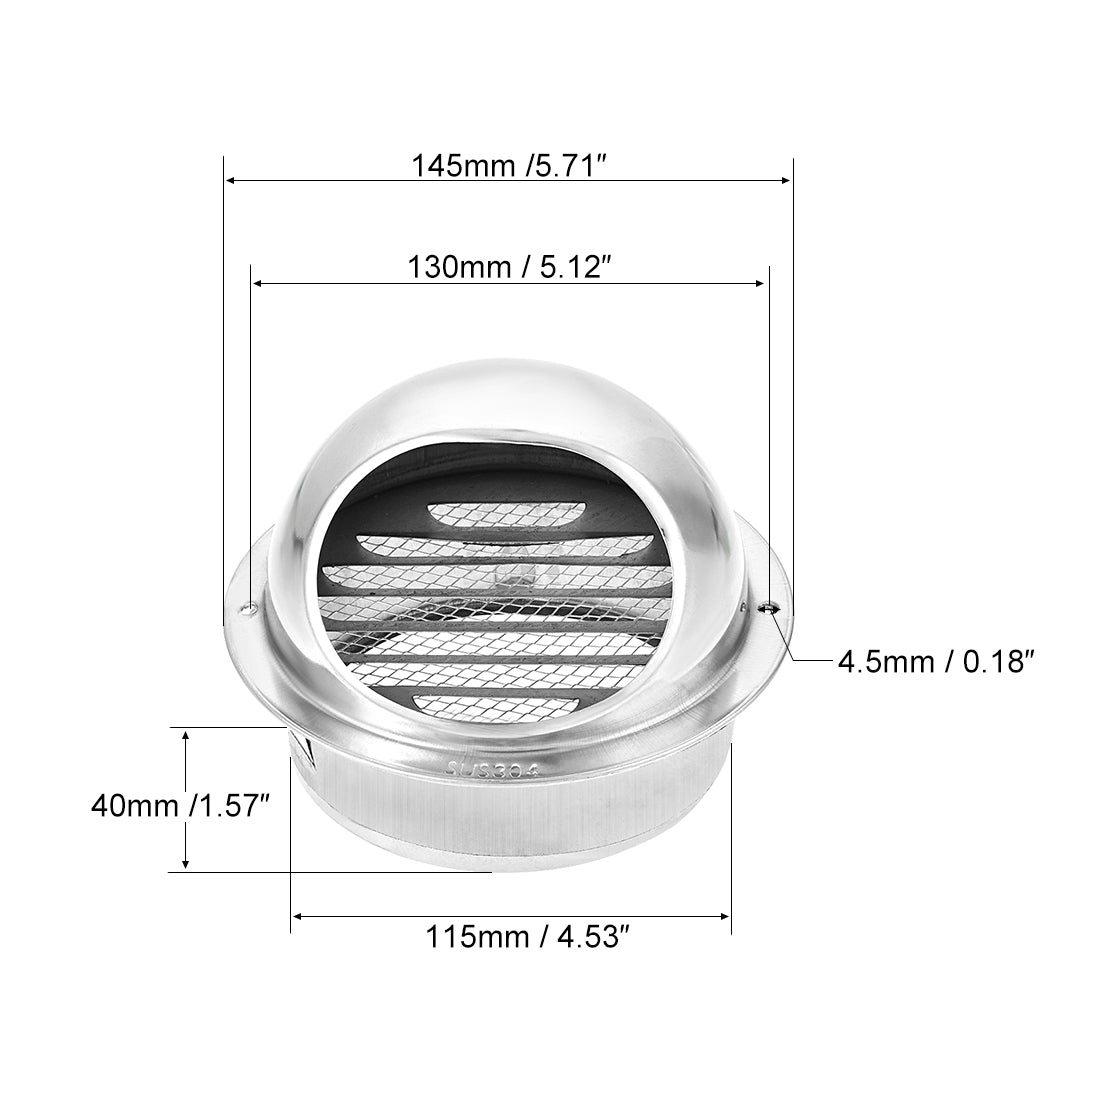 uxcell Uxcell Spherical Air Vent 4.7 Inch 120 mm 304 Stainless Steel Thickened Ducting Ventilation Exhaust Grille Cover Wall Vent